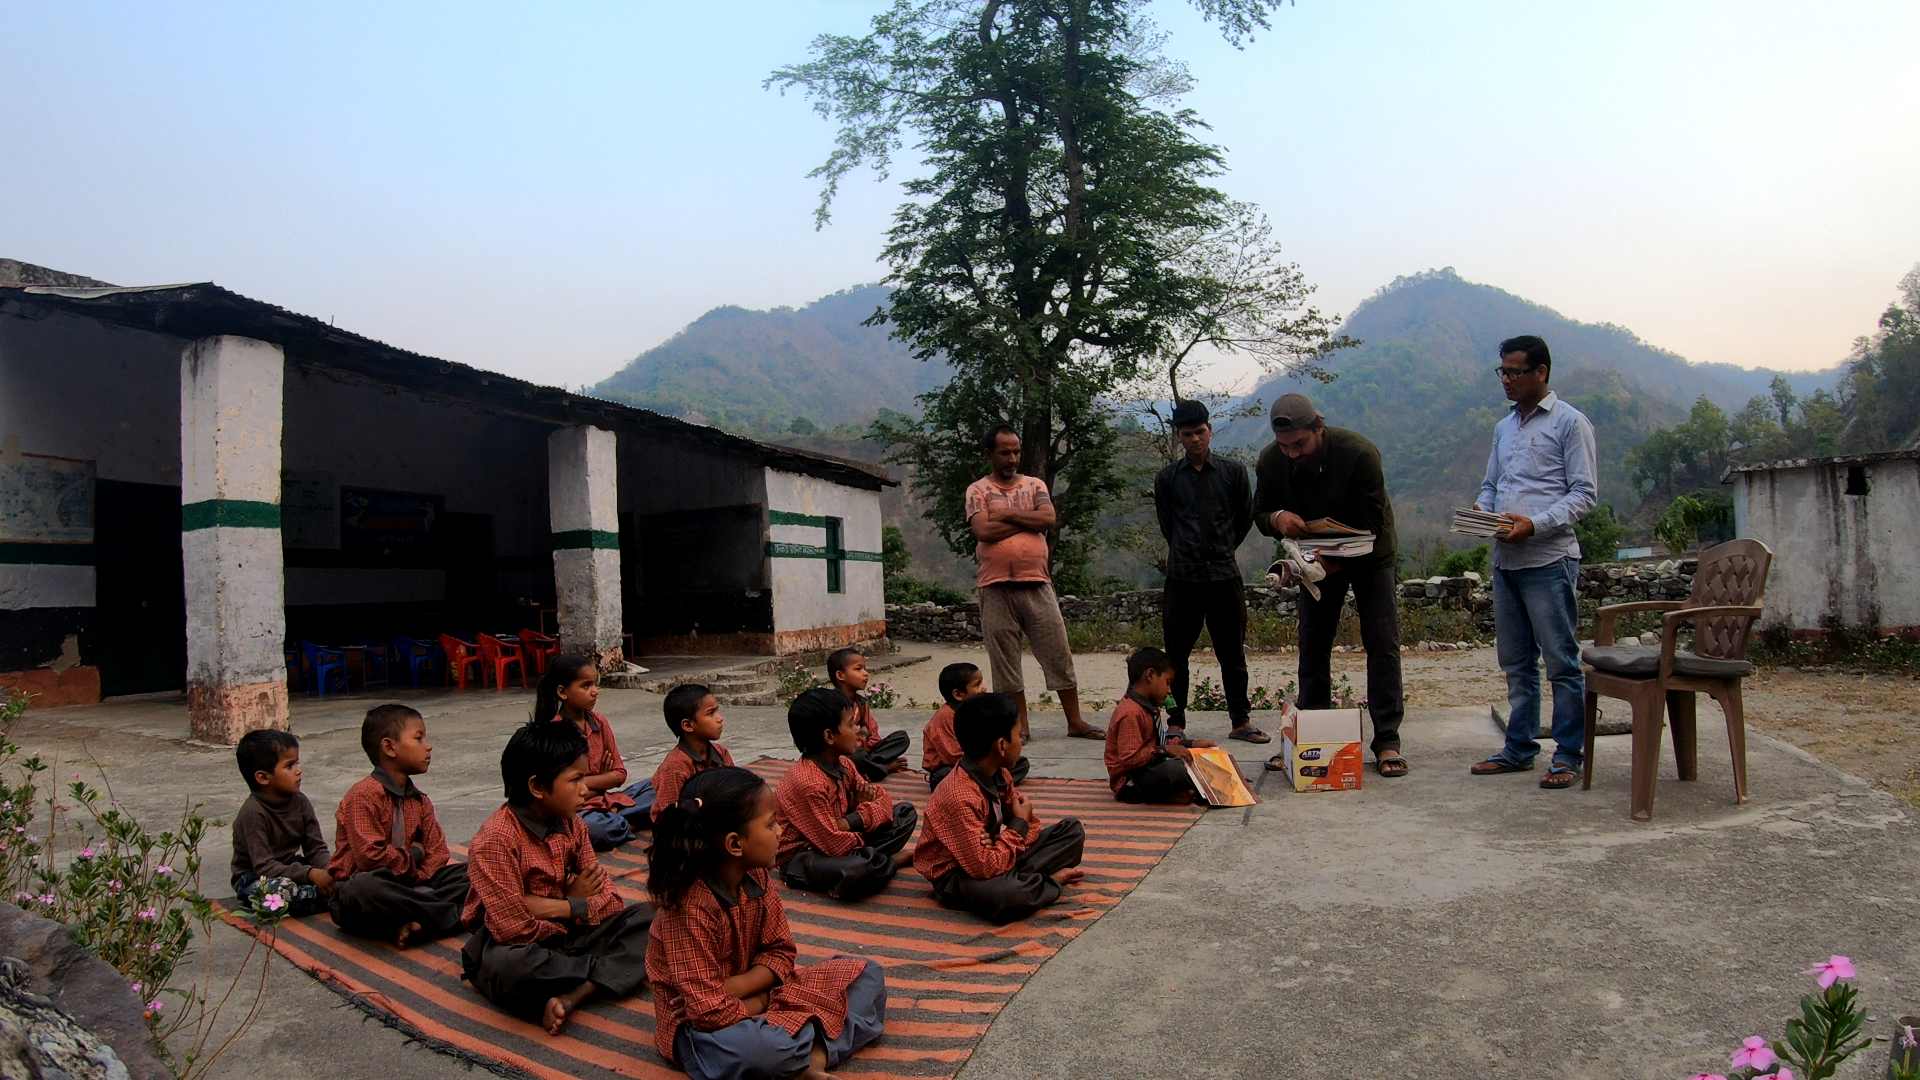 Nikhil and his team frequently distribute educational material to students in government-run schools in Uttarakhand